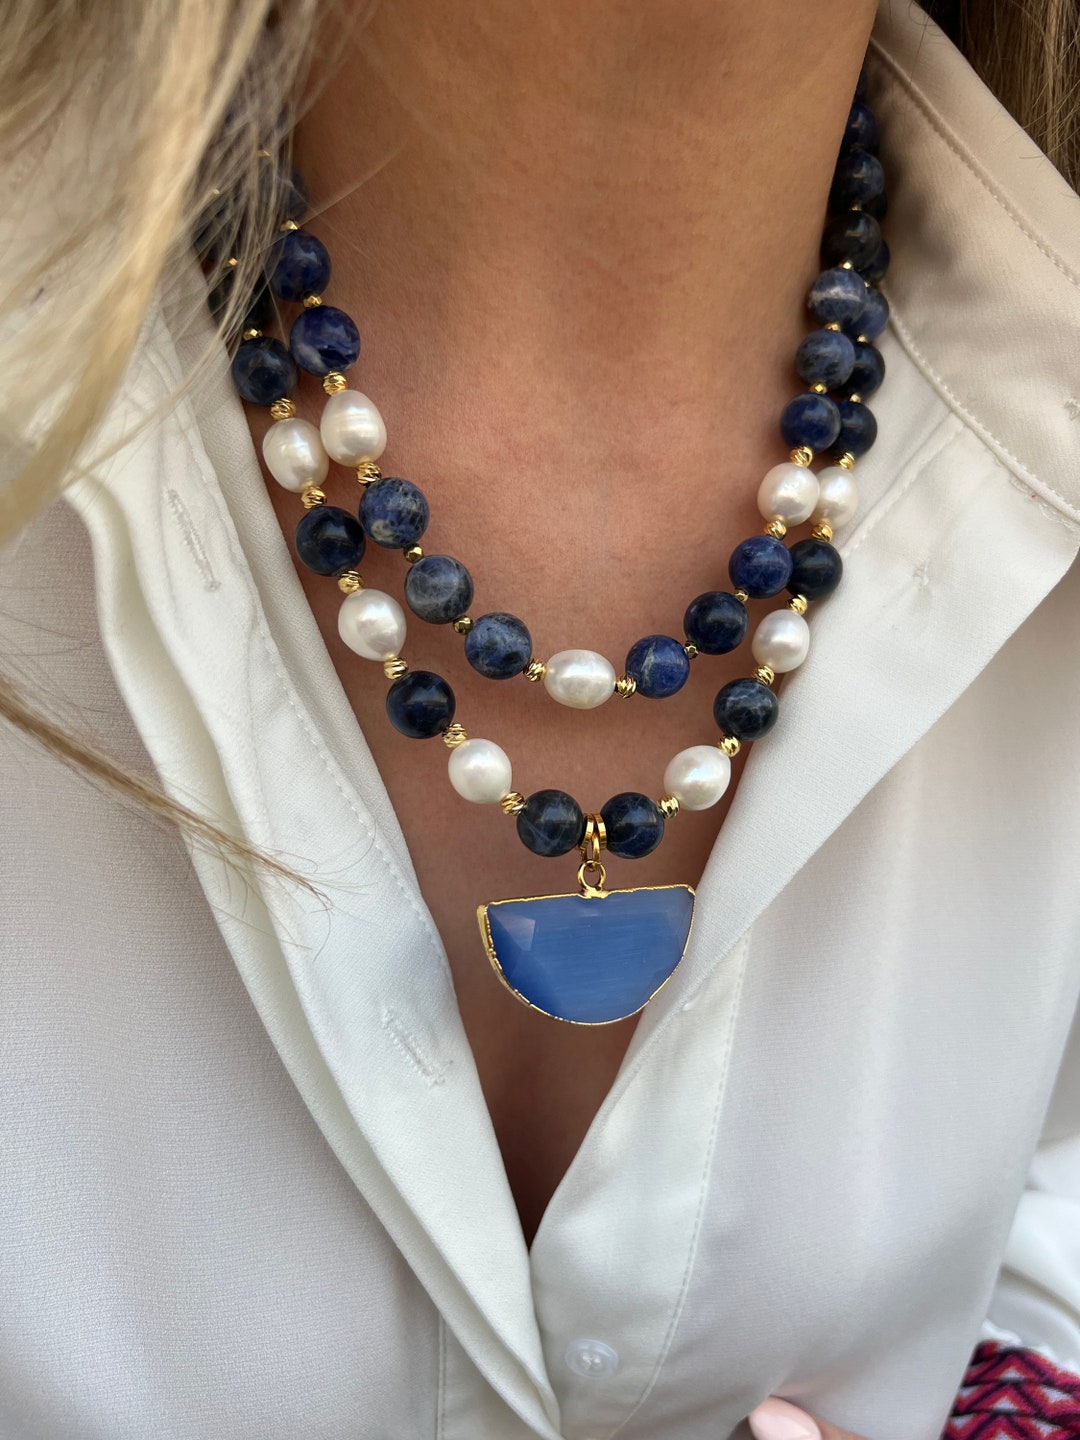 Sodalite Necklace, Pearl Jewelry With Gemstones, Beaded Blue Necklace ...